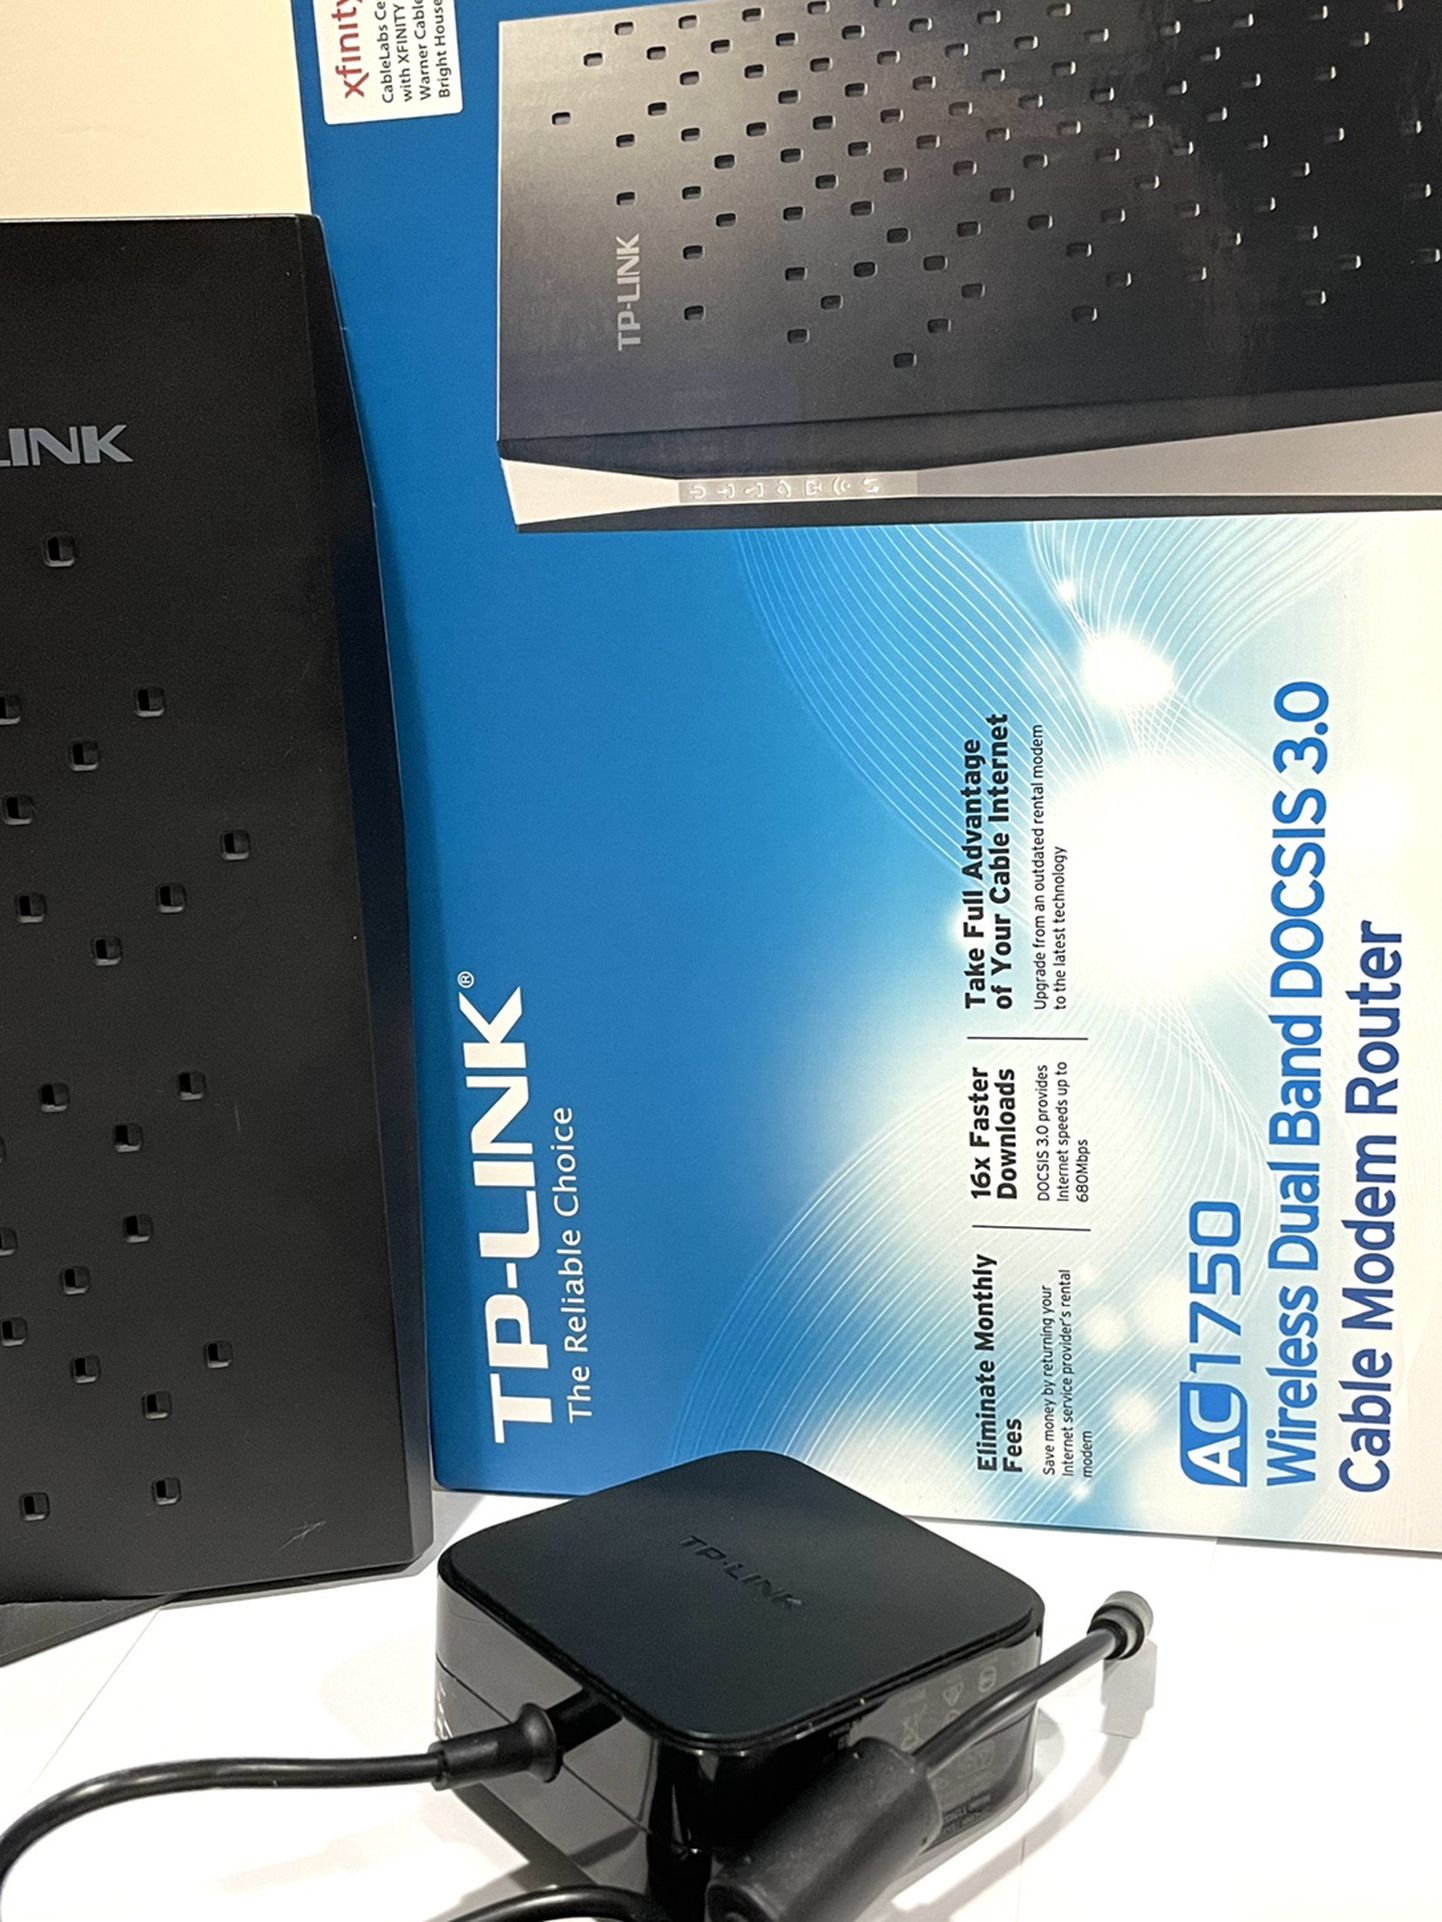 TP-LINK AC 1750 Wireless Dual Band DOCSIS 3.0 Cable Modem Router